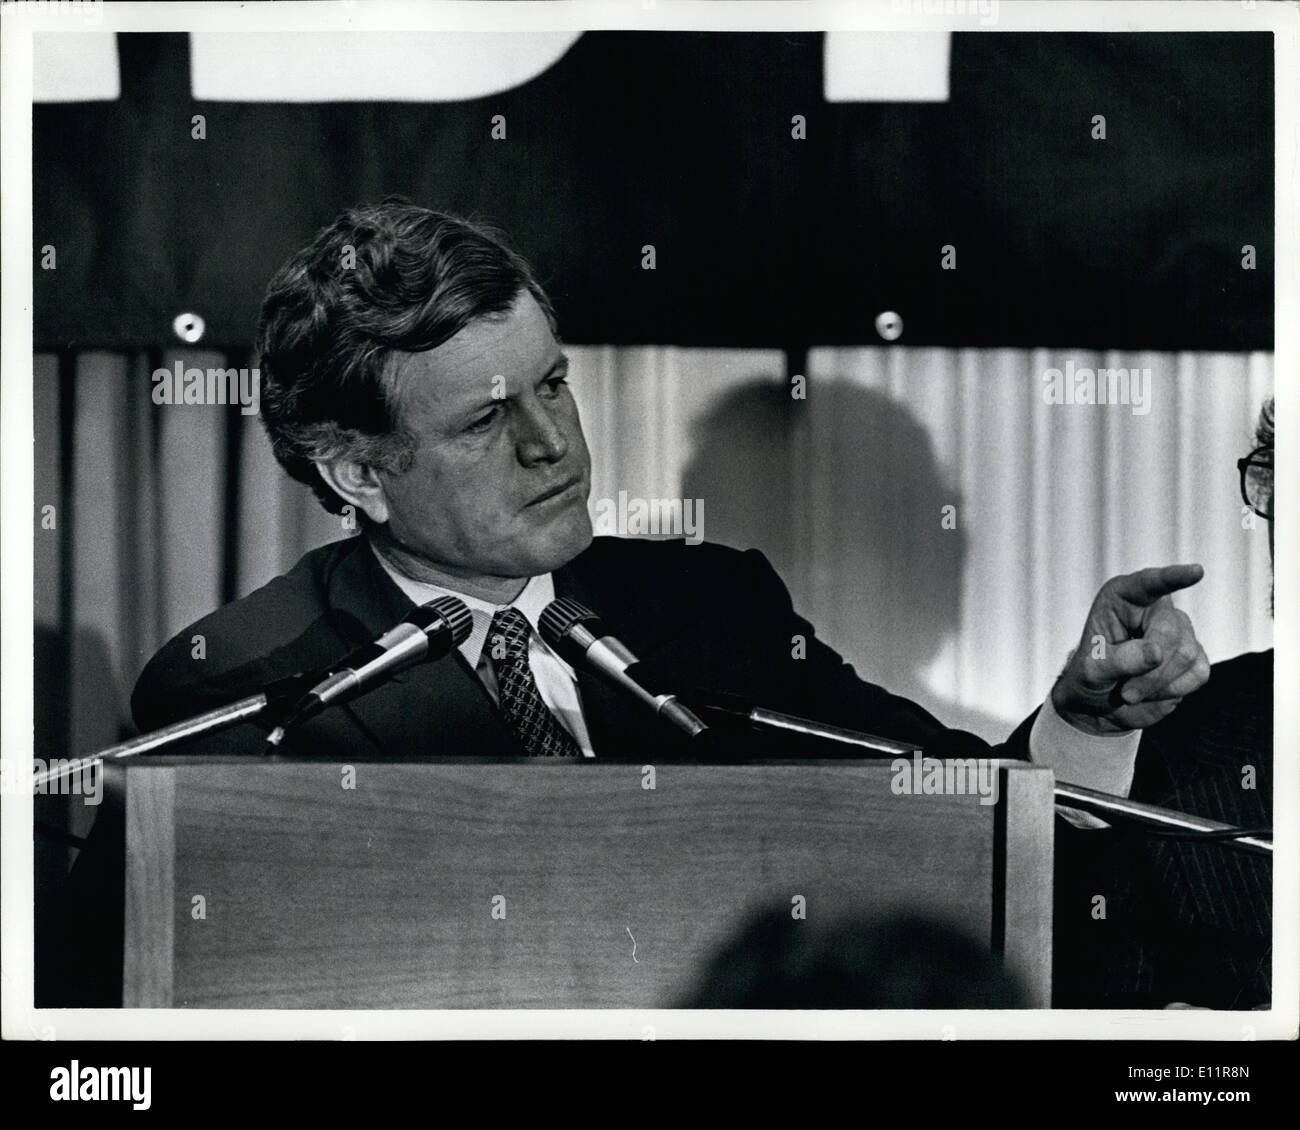 Dec. 12, 1979 - The New York Statler Hotel New York City. Senator Ted Kennedy campaigning at a breakfast fund raiser held in New York today. Stock Photo